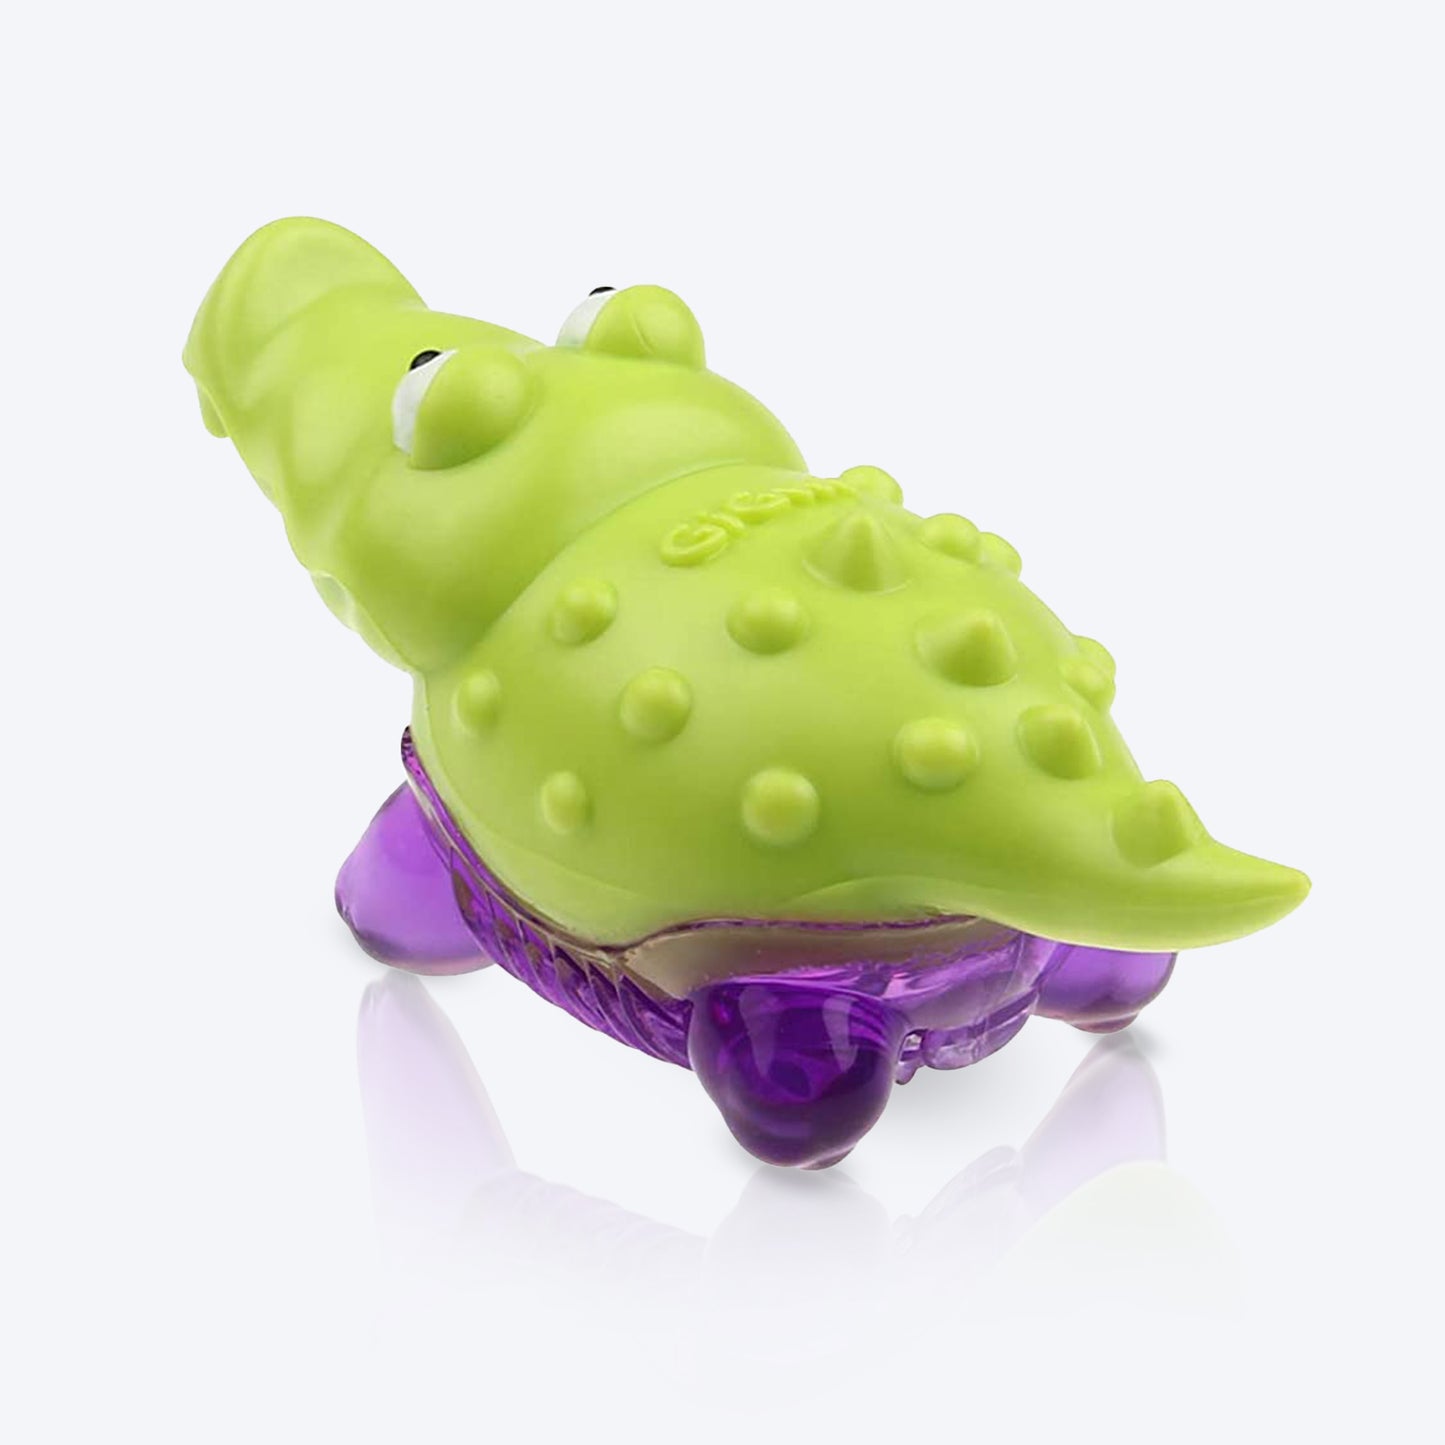 GiGwi Suppa Puppa Dog Squeaker Toy - Alligator - Green/Purple - Heads Up For Tails